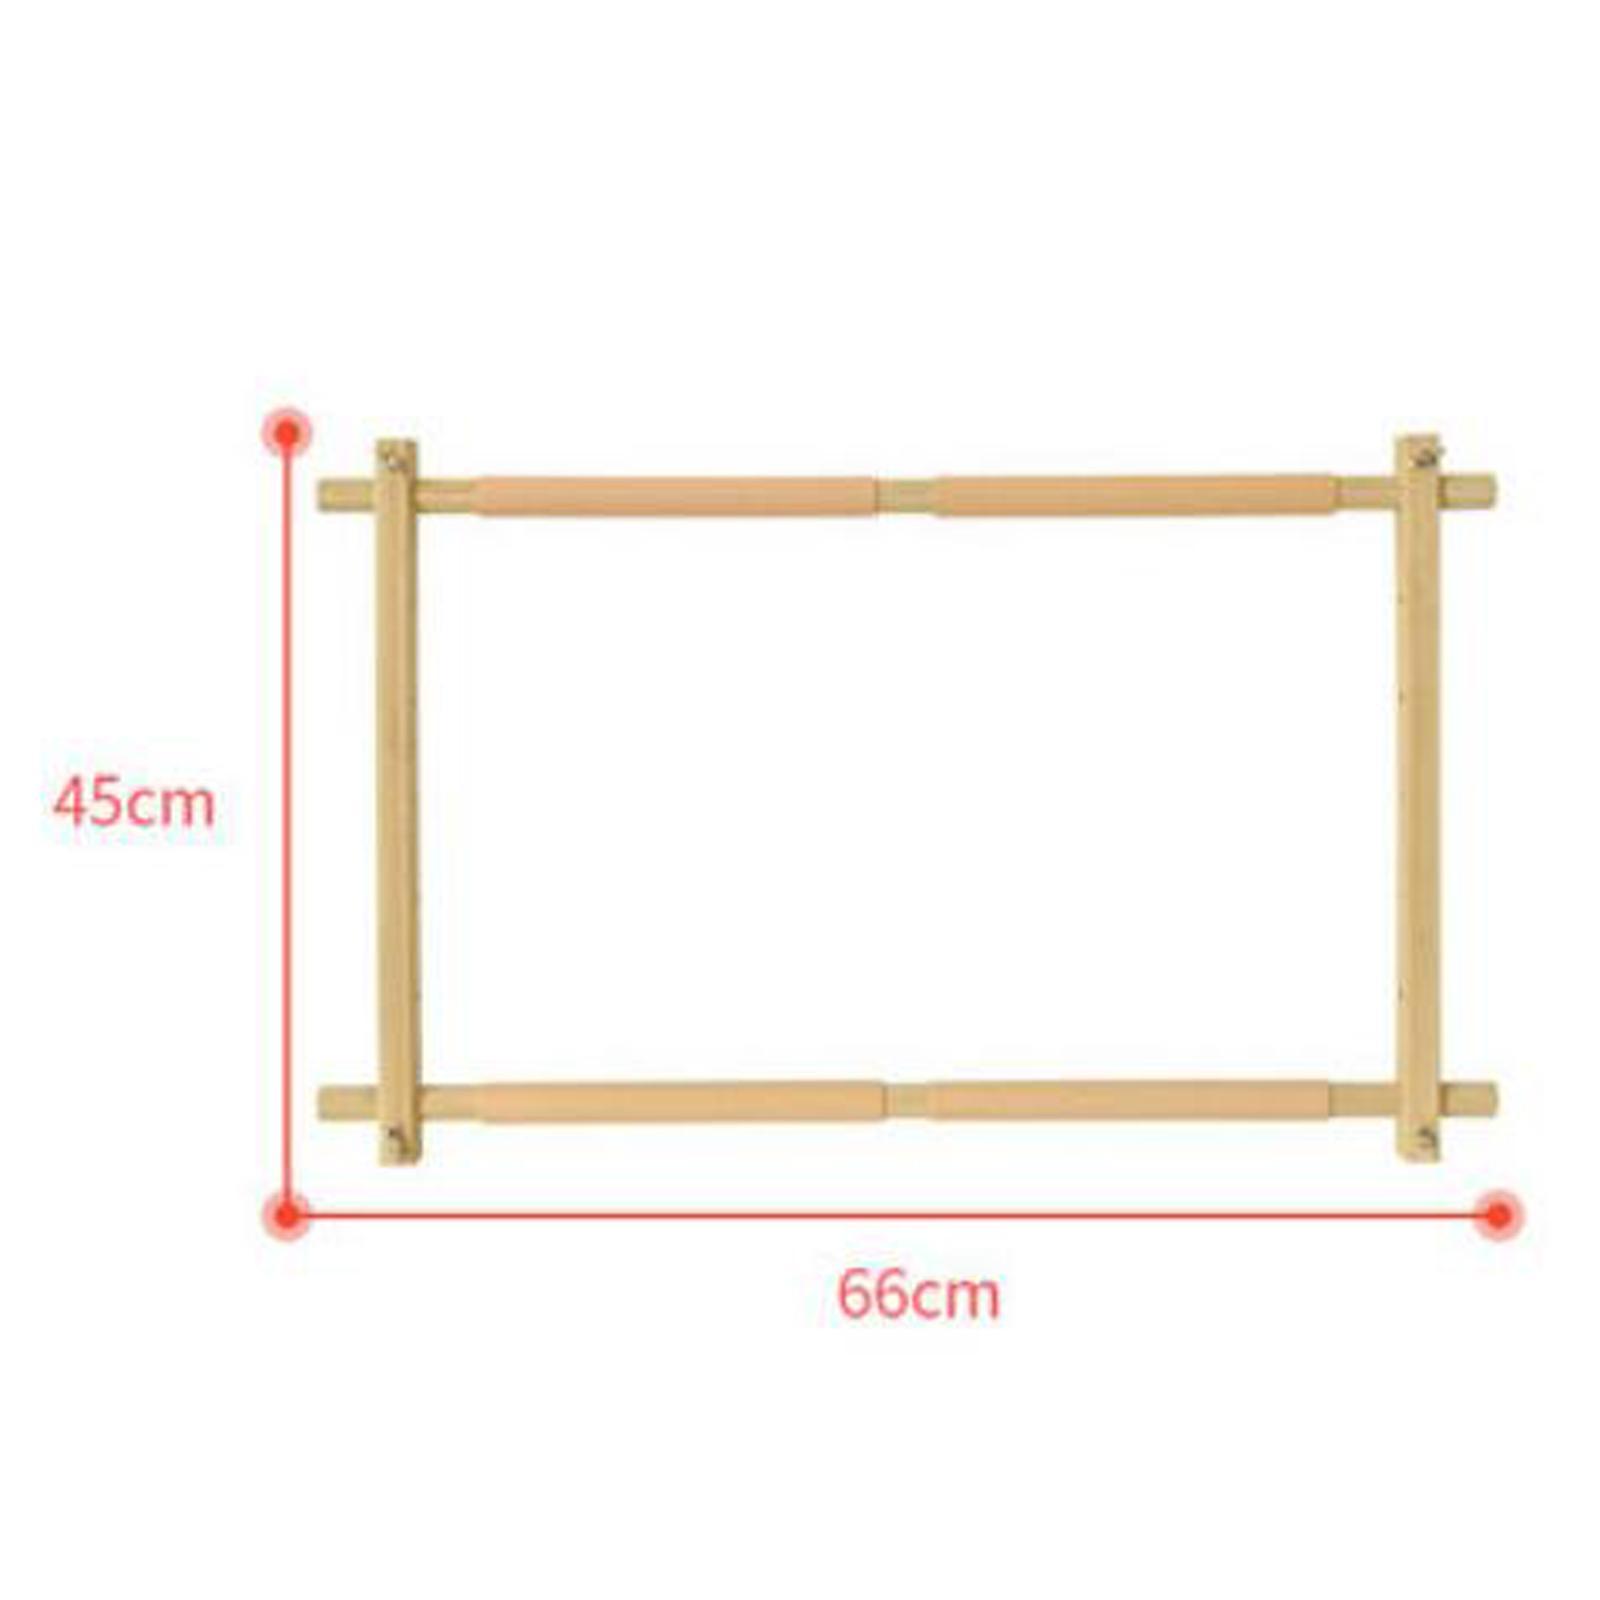 Portable Embroidery Frame Cross Stitch Display Frame for Handwork Tool